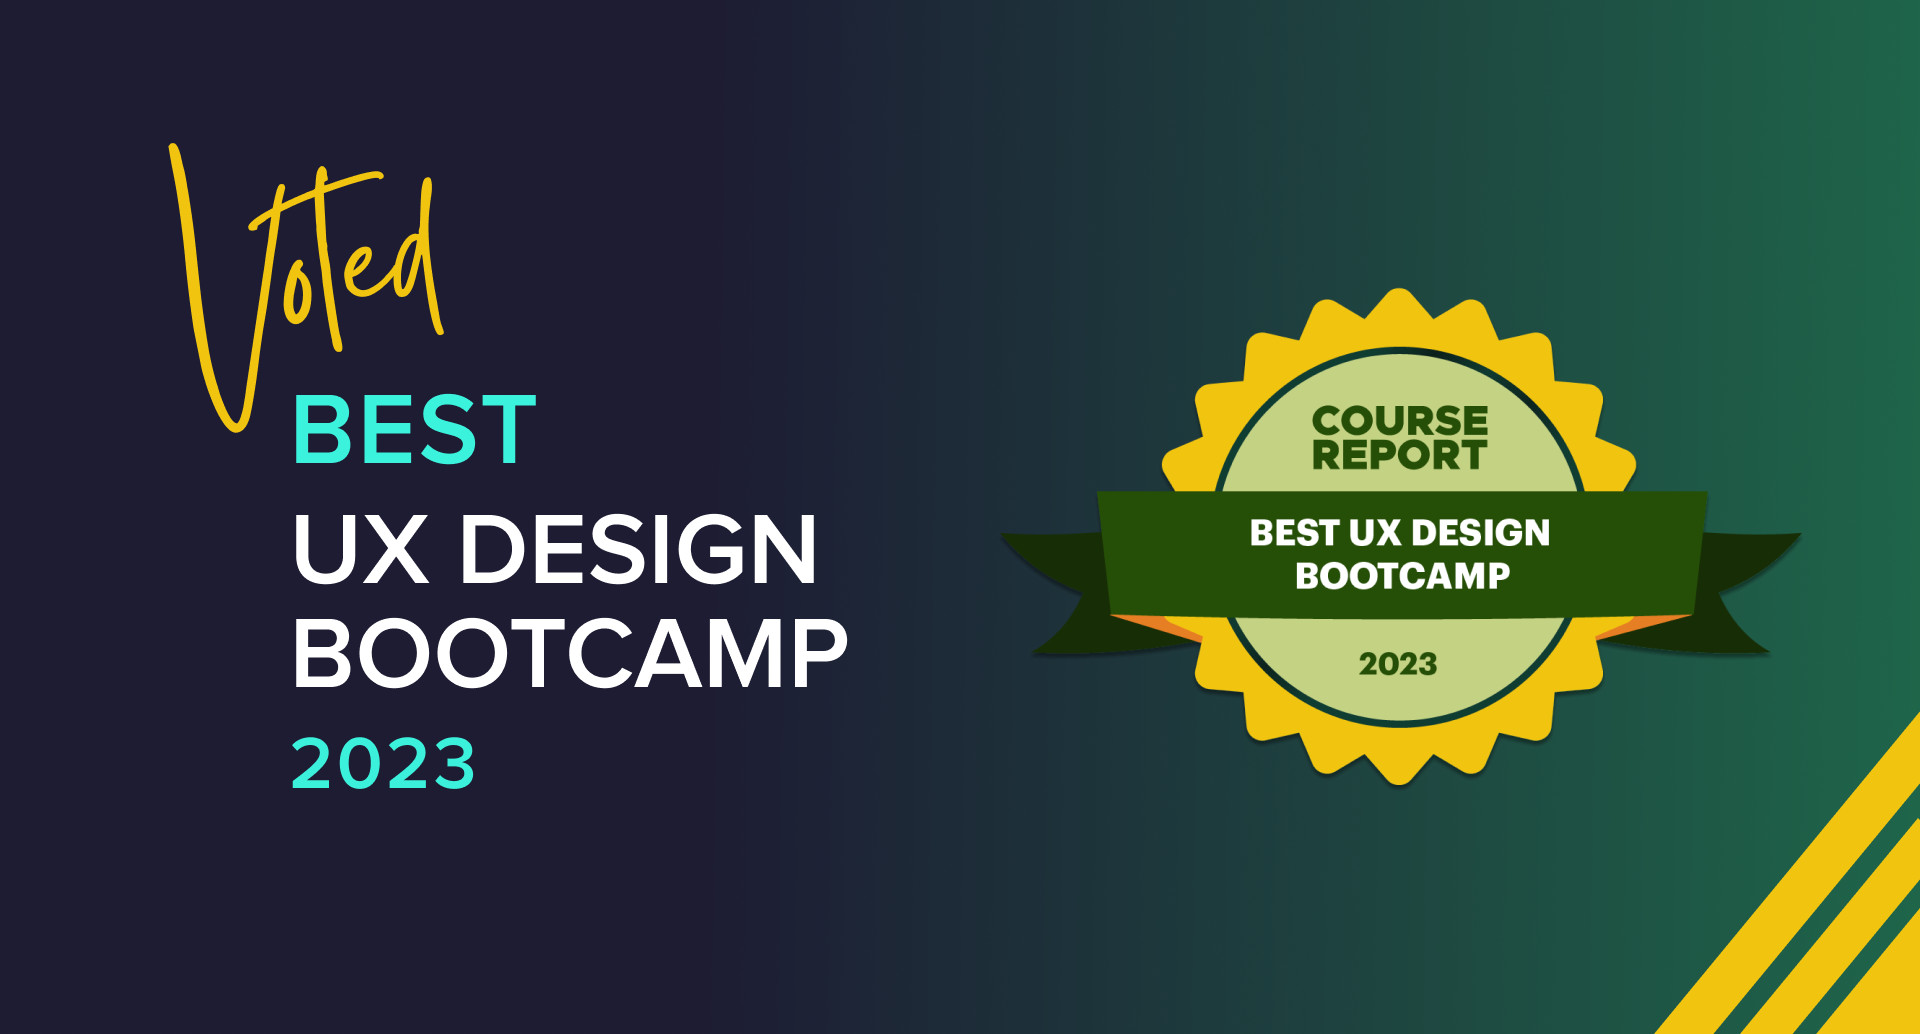 an image with the best ux design bootcamps badge from course report